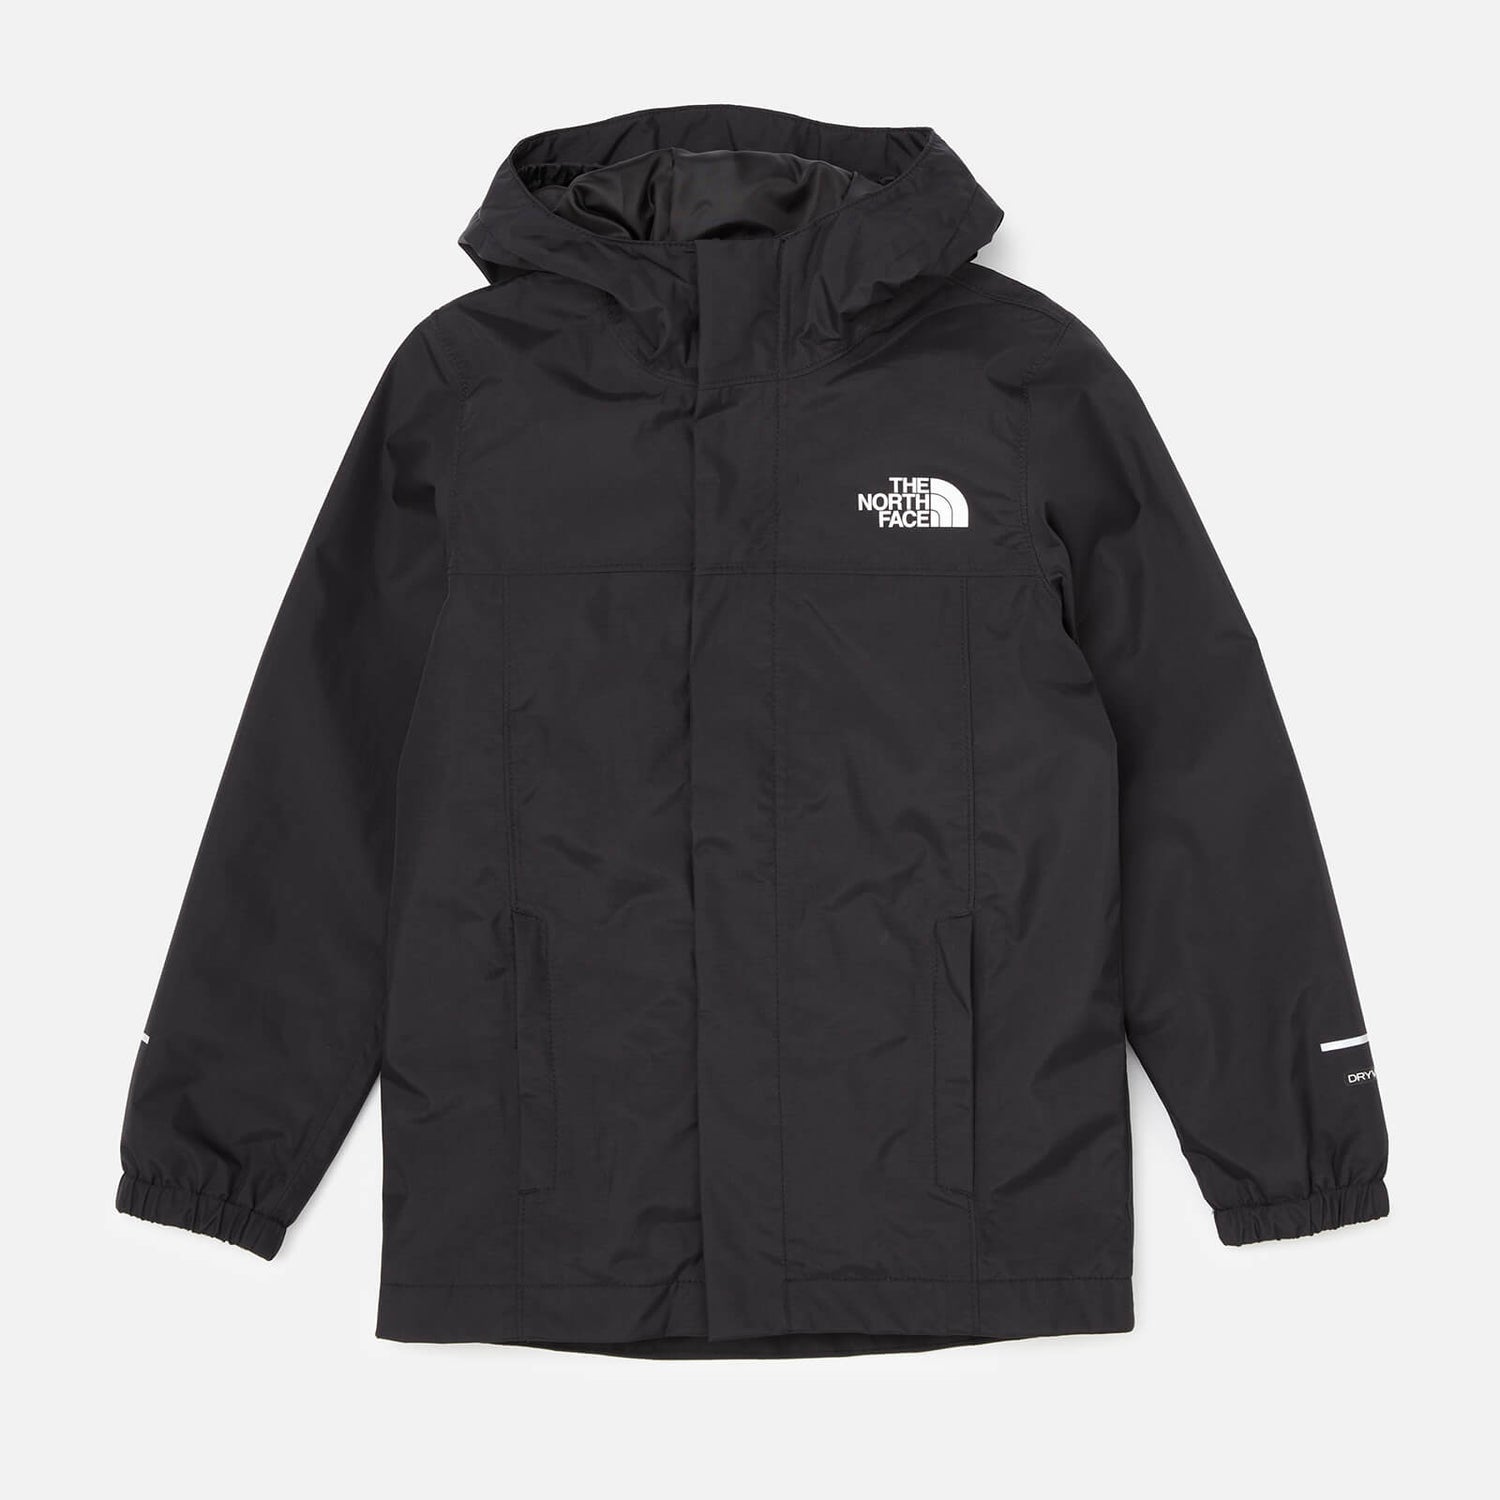 The North Face Boys' Resolve Reflective Jacket - Black - 6 Years